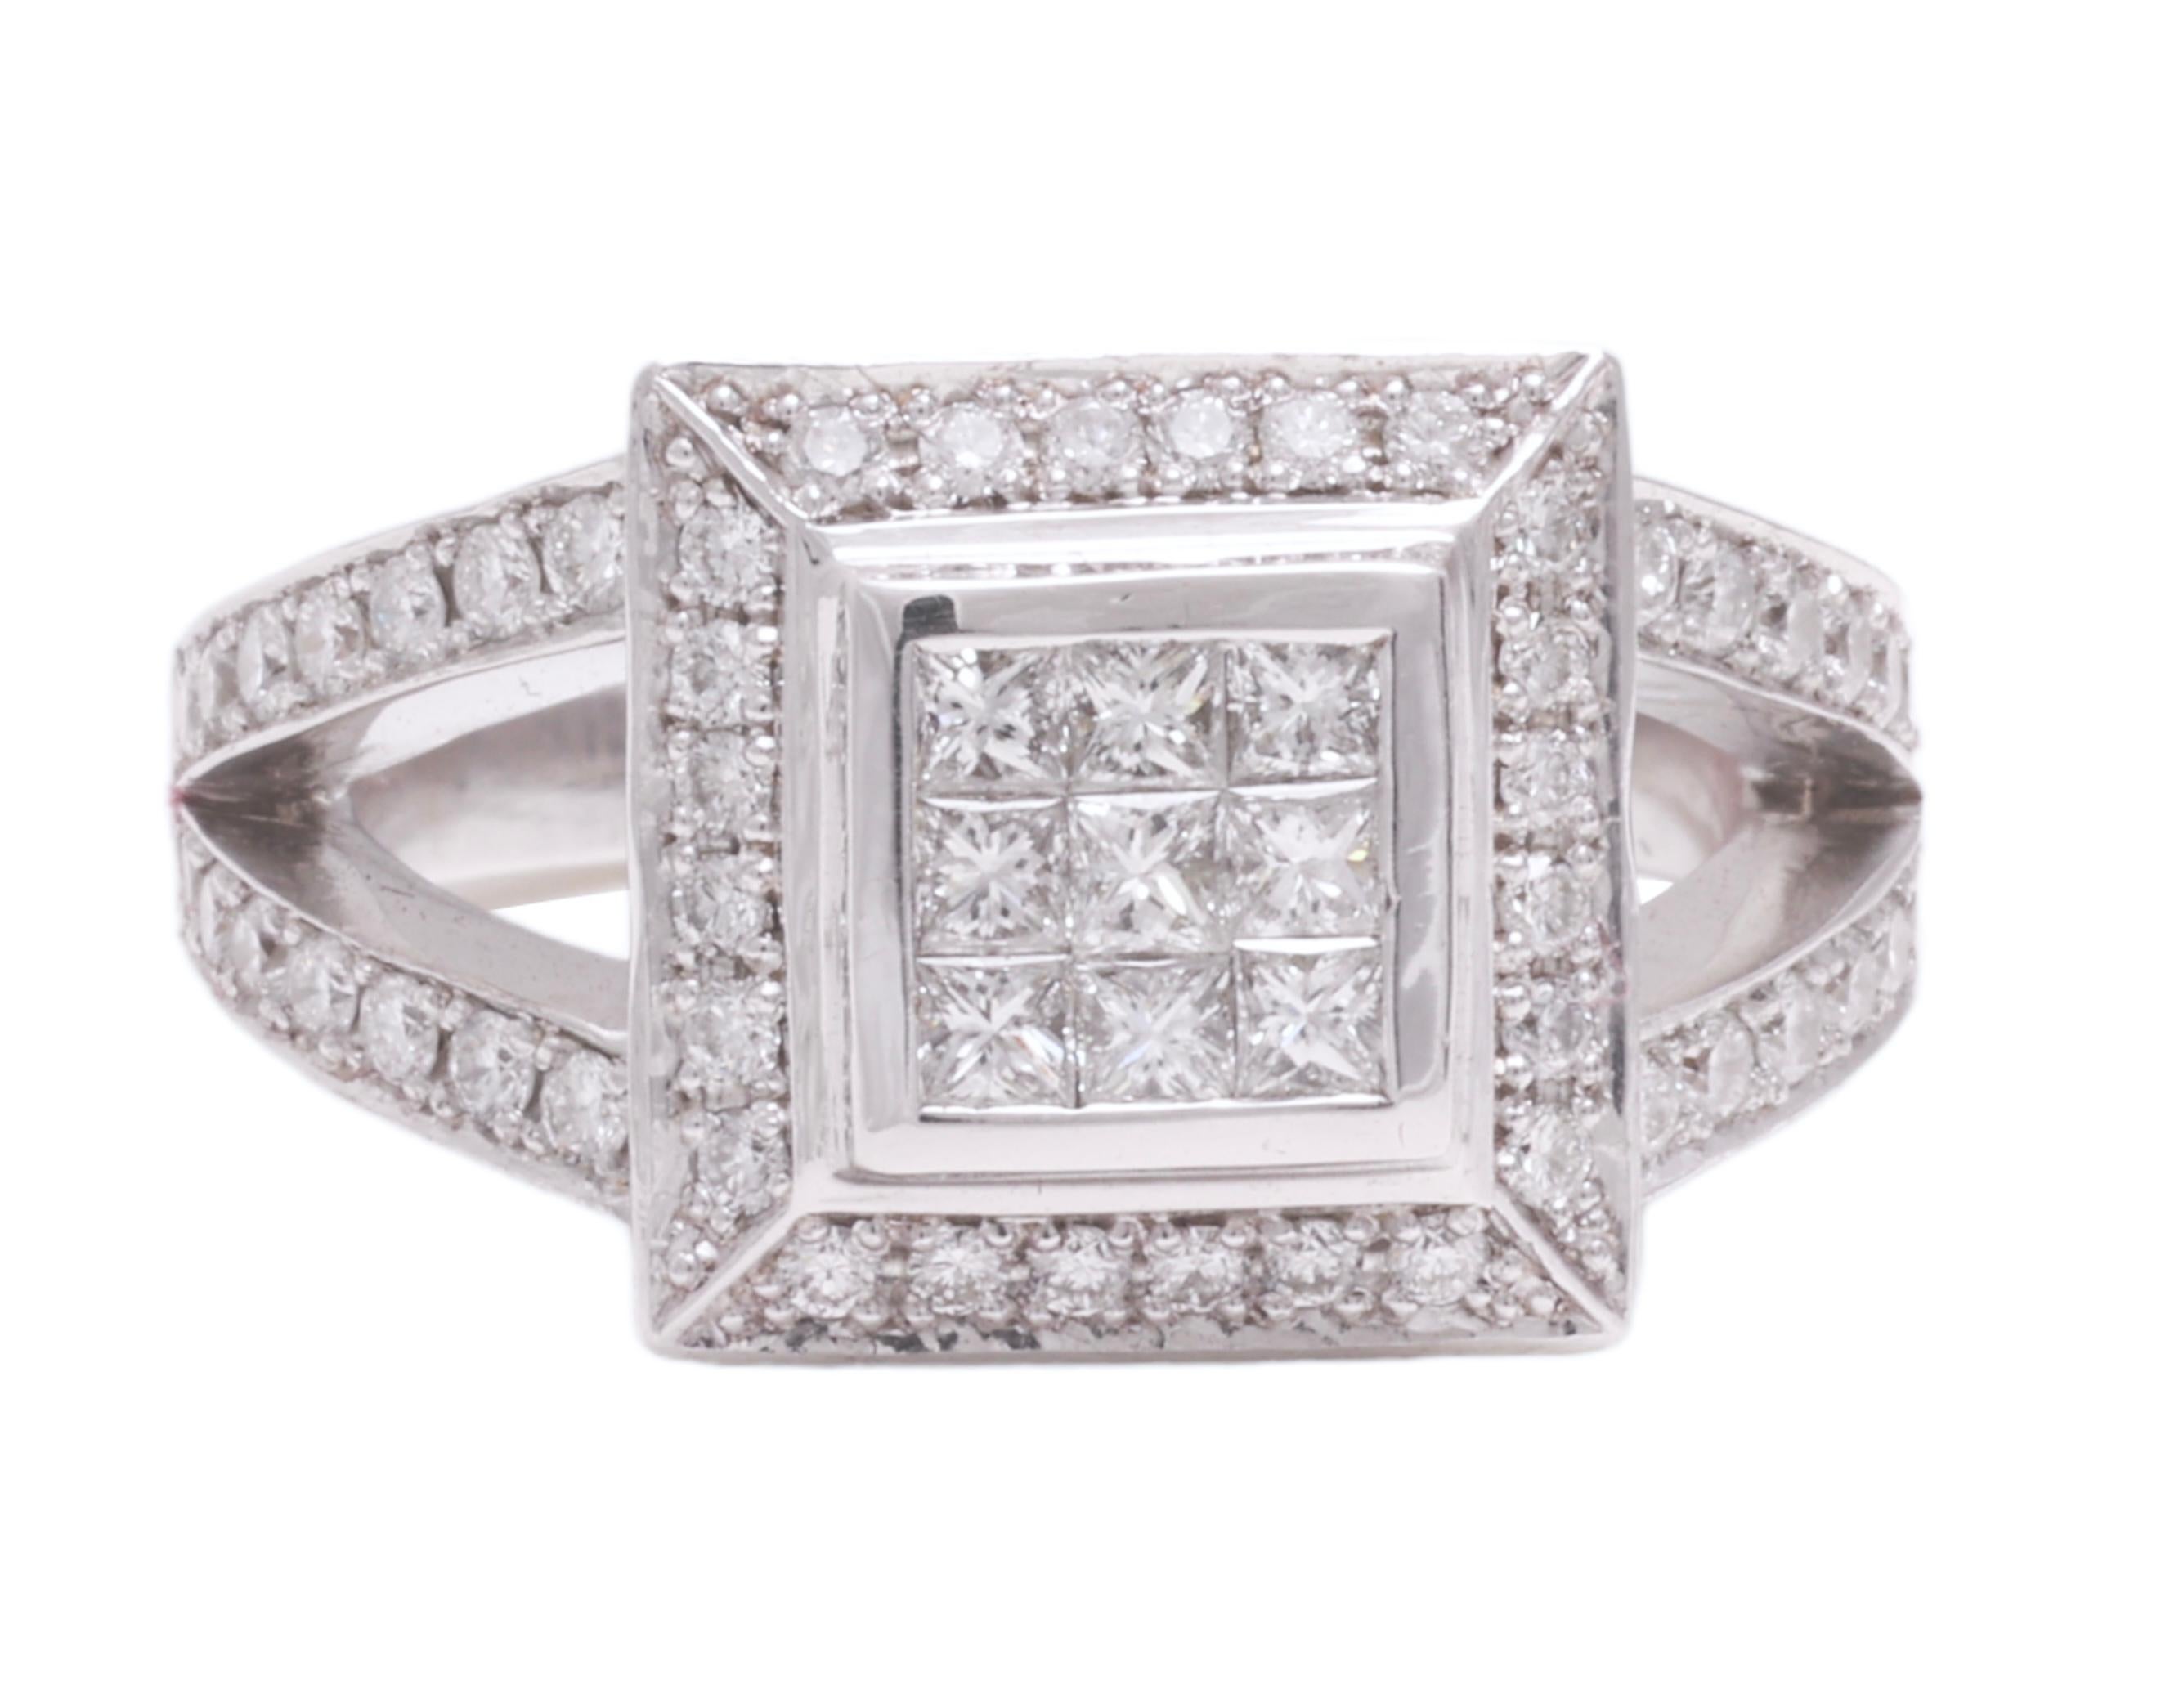 18 Kt SOLID WHITE GOLDEN RING WITH PRINCESS 1 BRILLIANT CUT DIAMONDS

MATERIAL: 18 kt white gold

SIZE: 53 ( can be resized for free)

WEIGHT: 11.4 grams / 7.3 dwt / 0.400 oz

DIAMONDS: brilliant and princess cut diamonds together ca. 1.05 cts